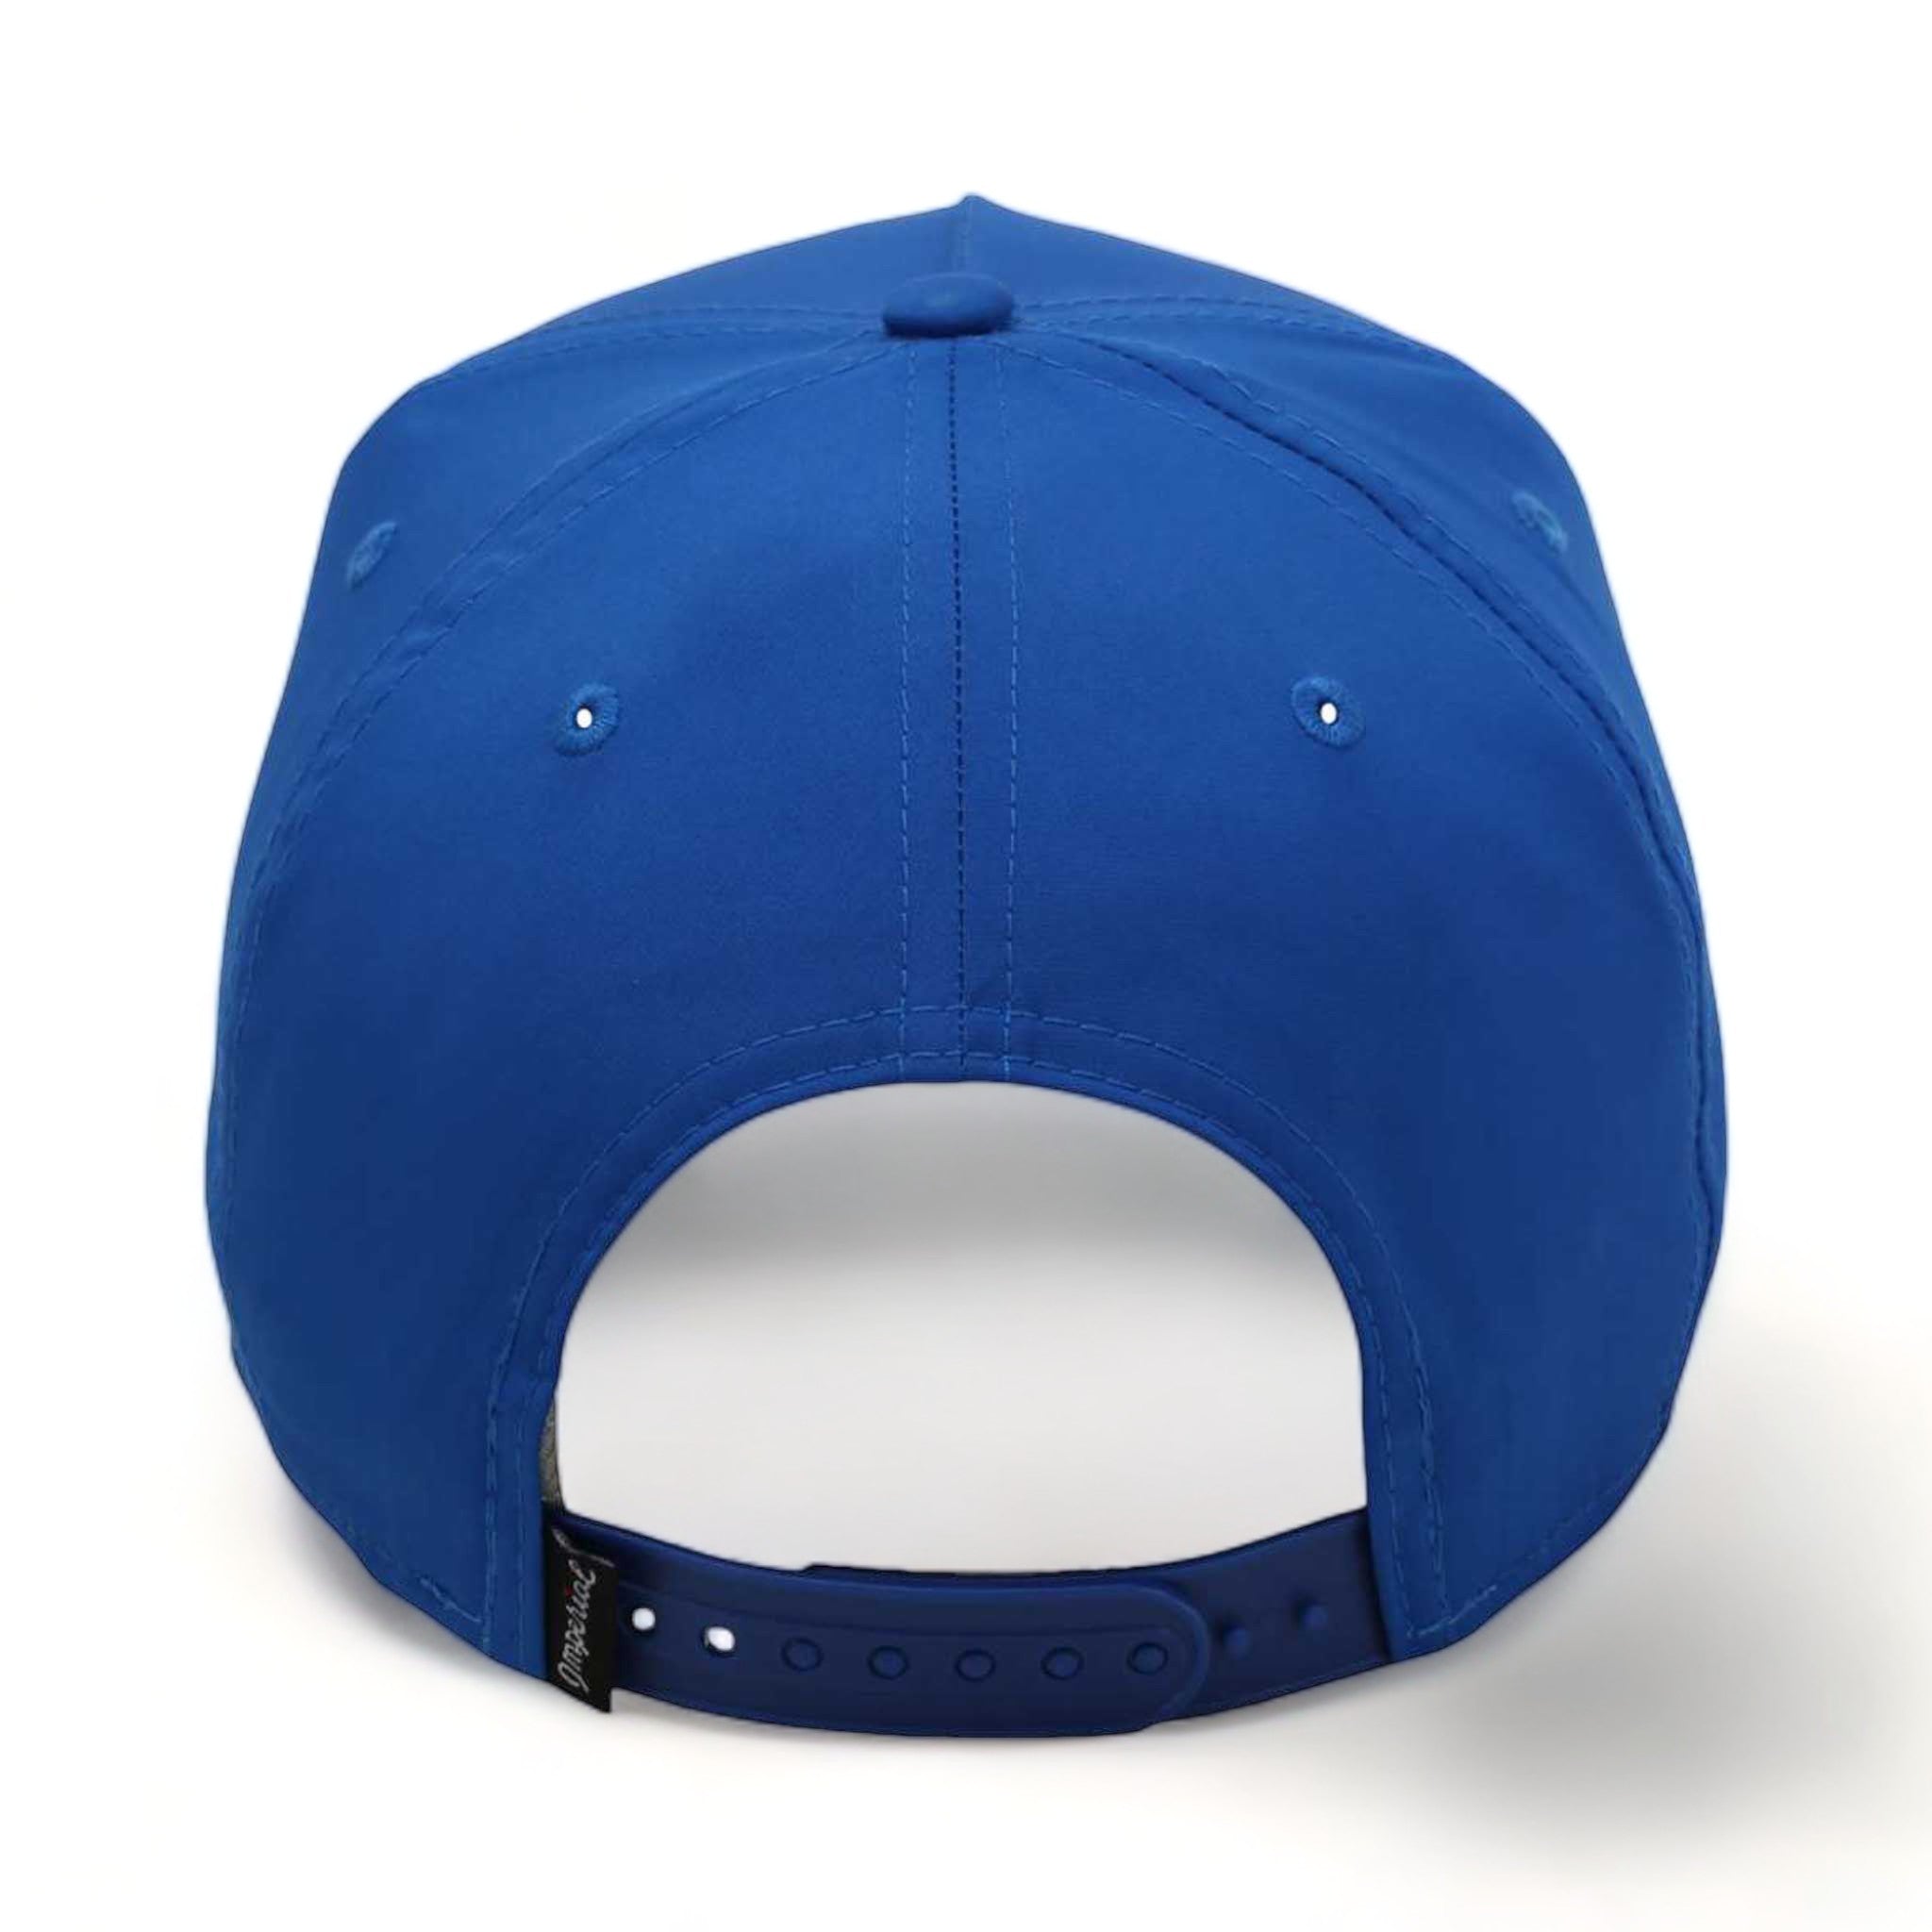 Back view of Imperial 5054 custom hat in royal and white